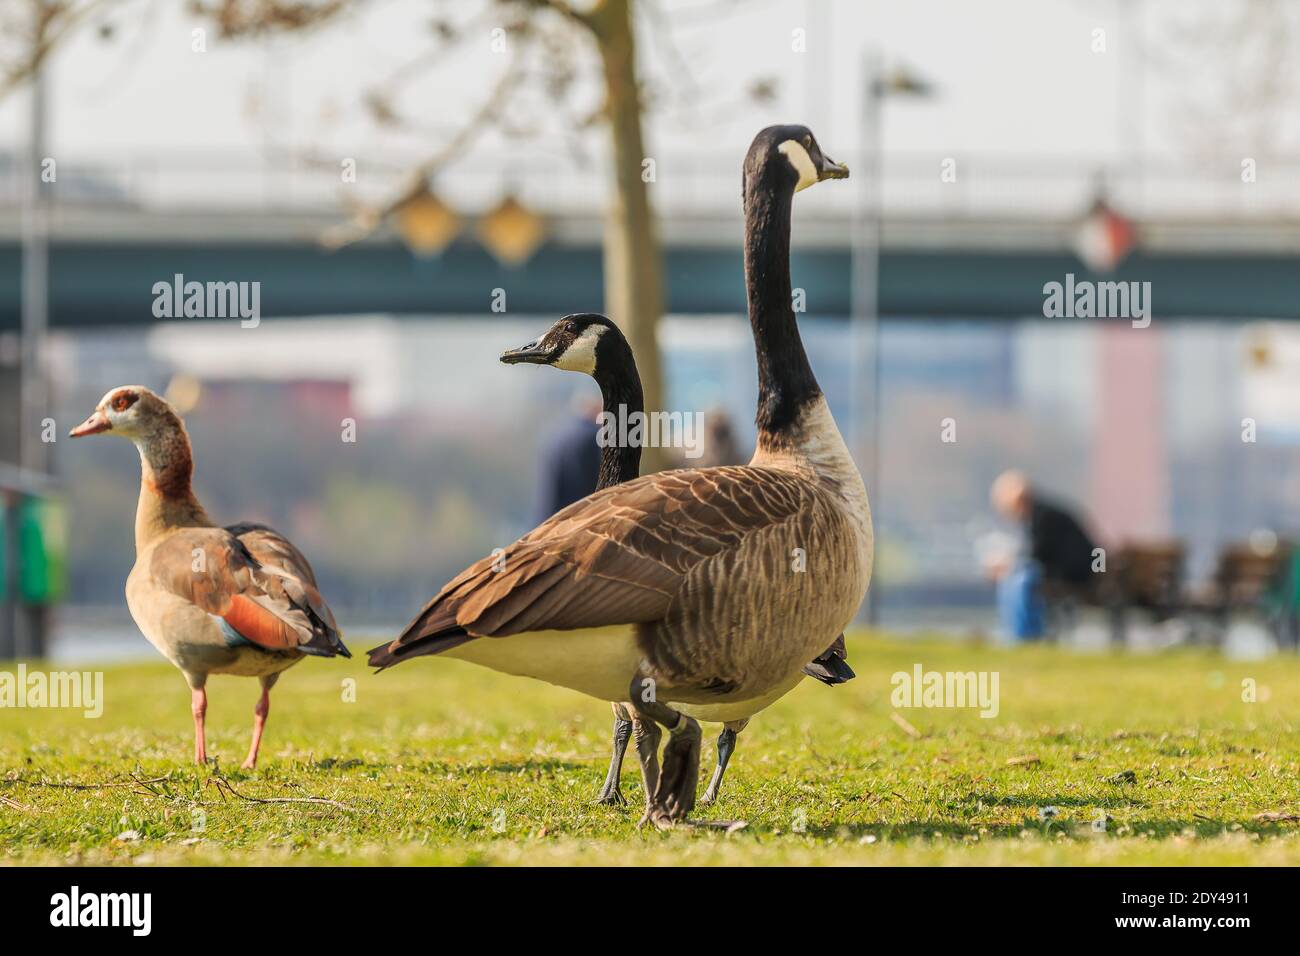 Two Canada Geese run on a green meadow in the spring sunshine. Brown and white plumage with a bowed head. Black feathers on the neck. Egyptian goose Stock Photo